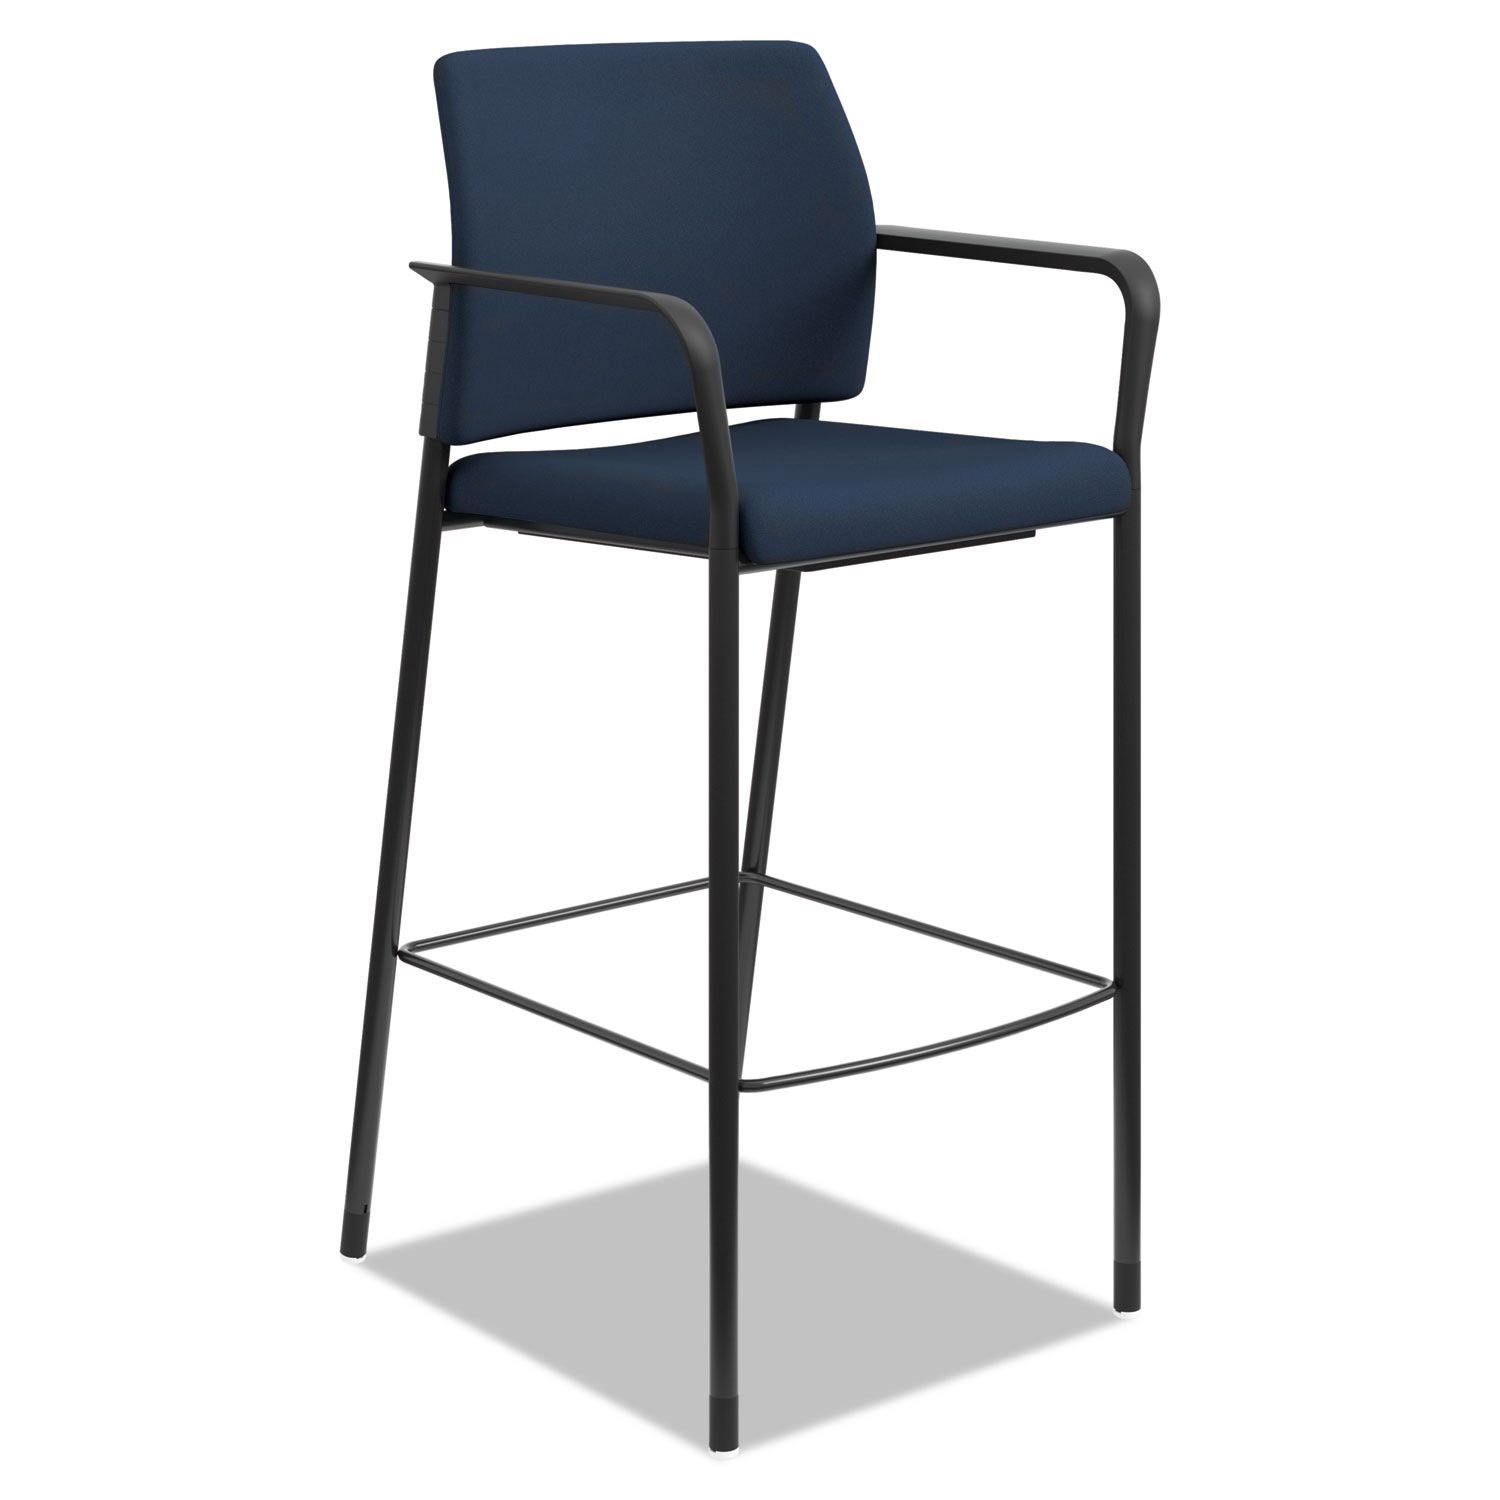 Accommodate Series Cafe Stool with Fixed Arms Supports Up to 300 lb, 30" Seat Height, Navy Seat/Back, Black Base